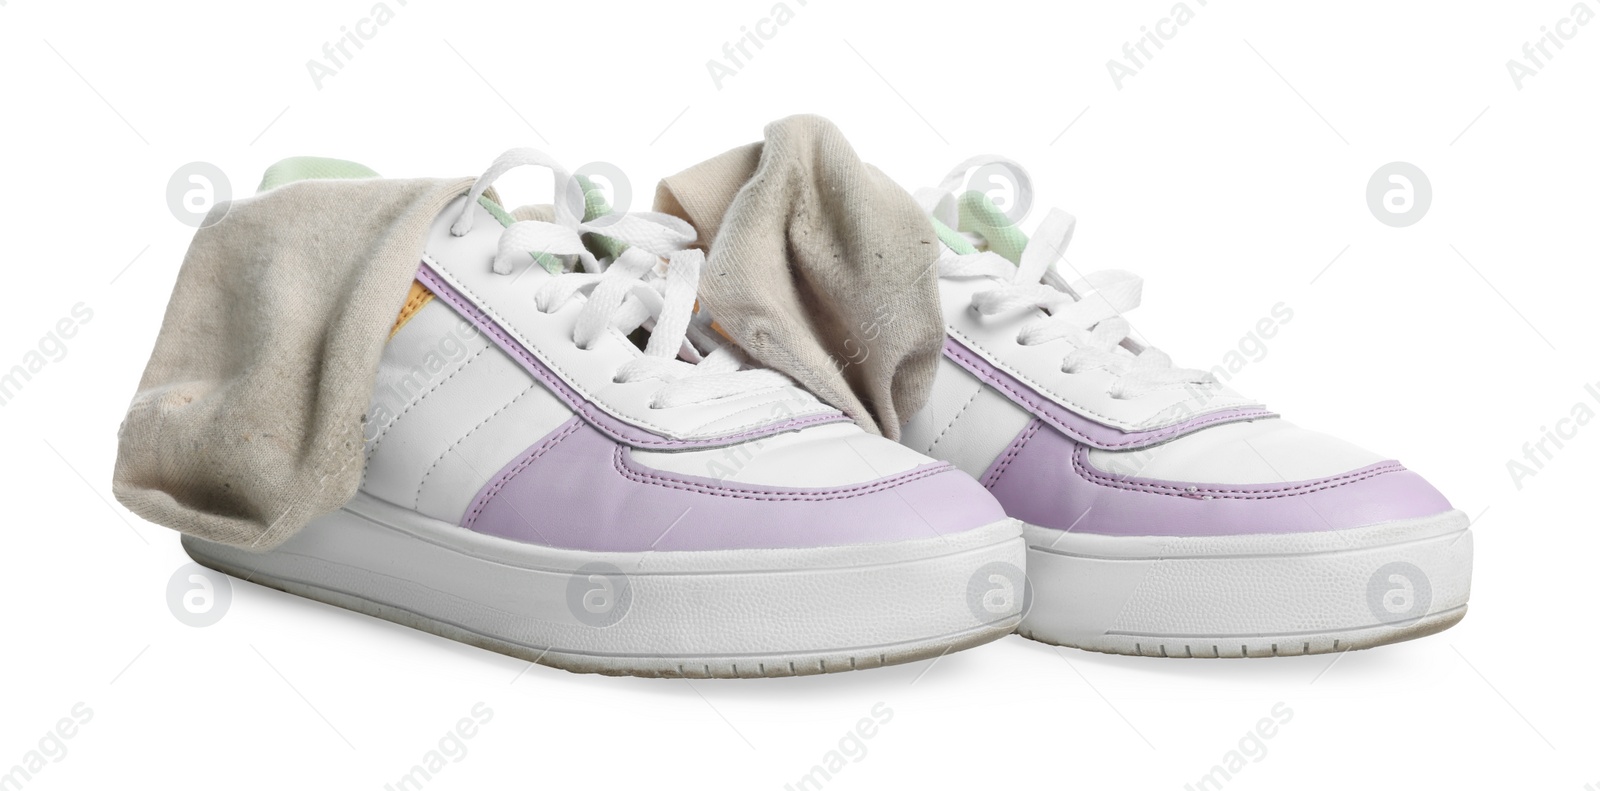 Photo of Dirty socks and sneakers on white background